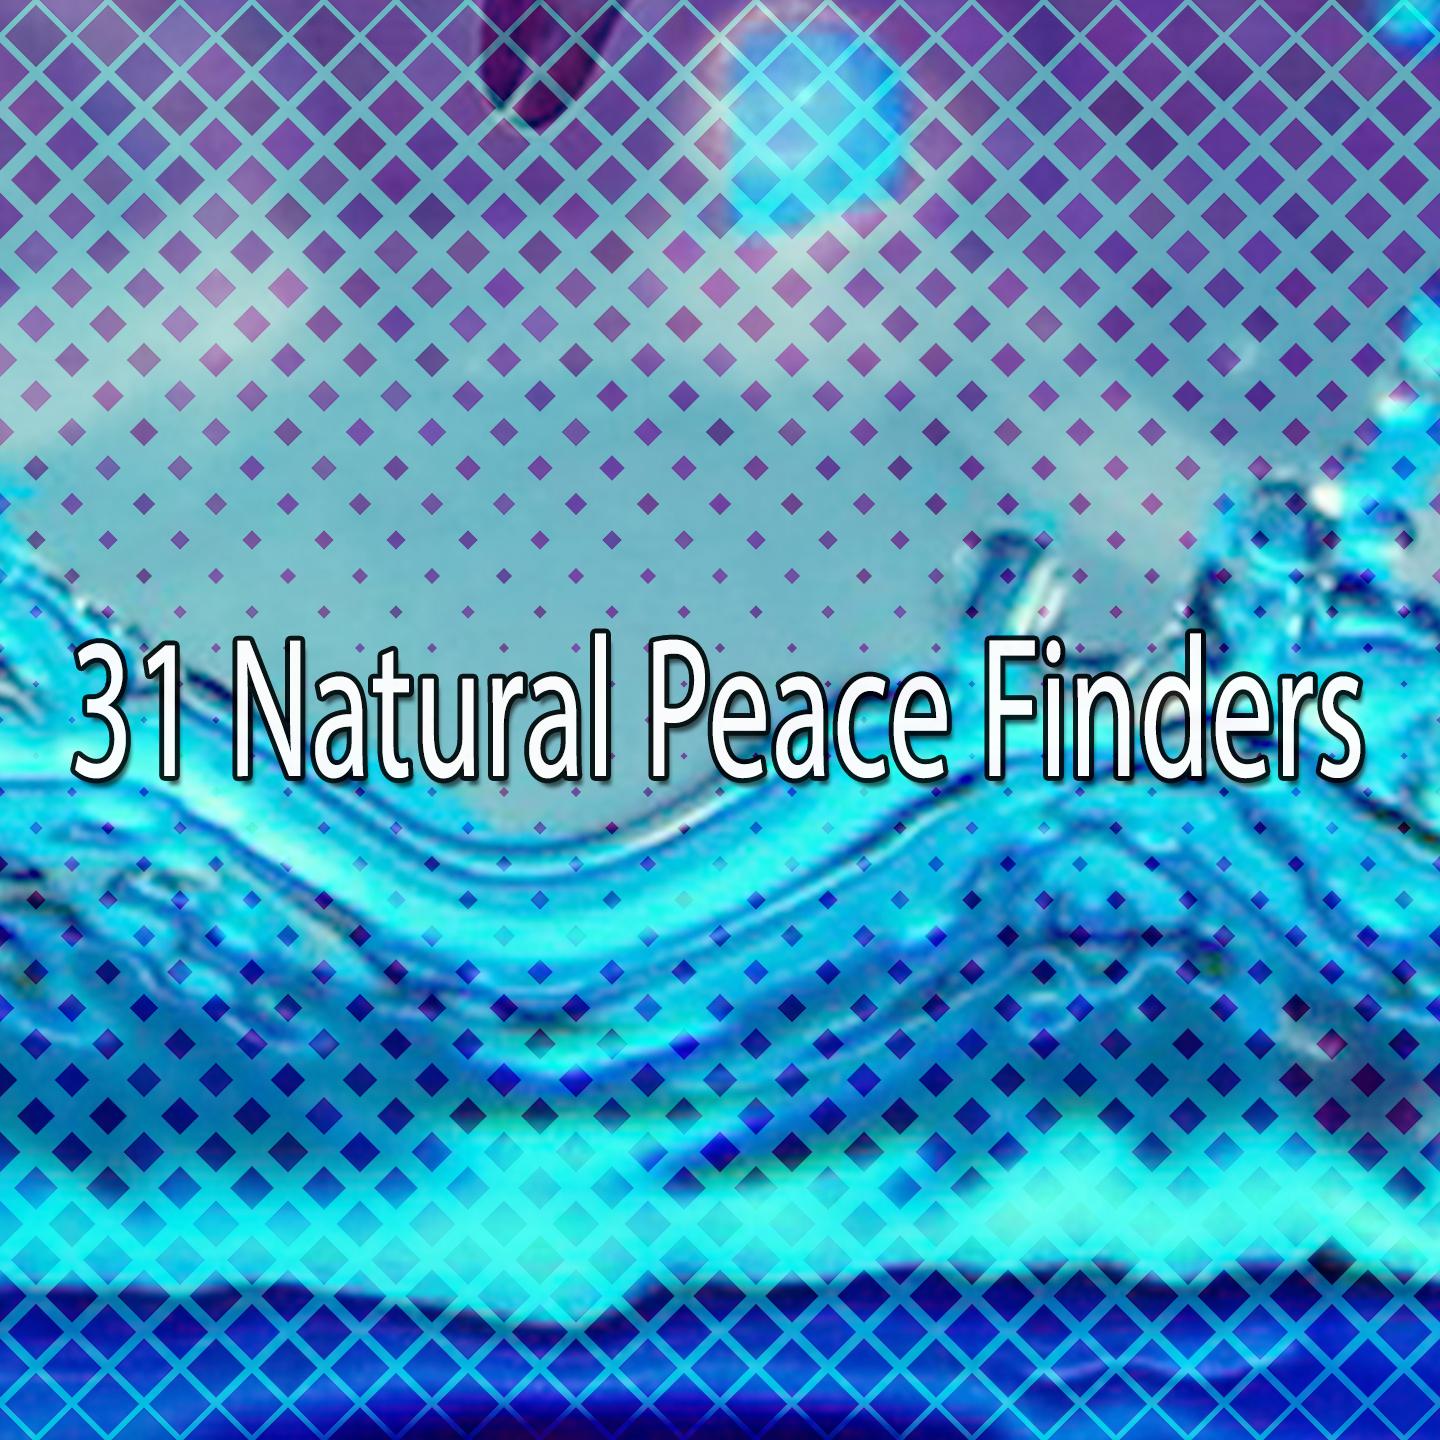 31 Natural Peace Finders